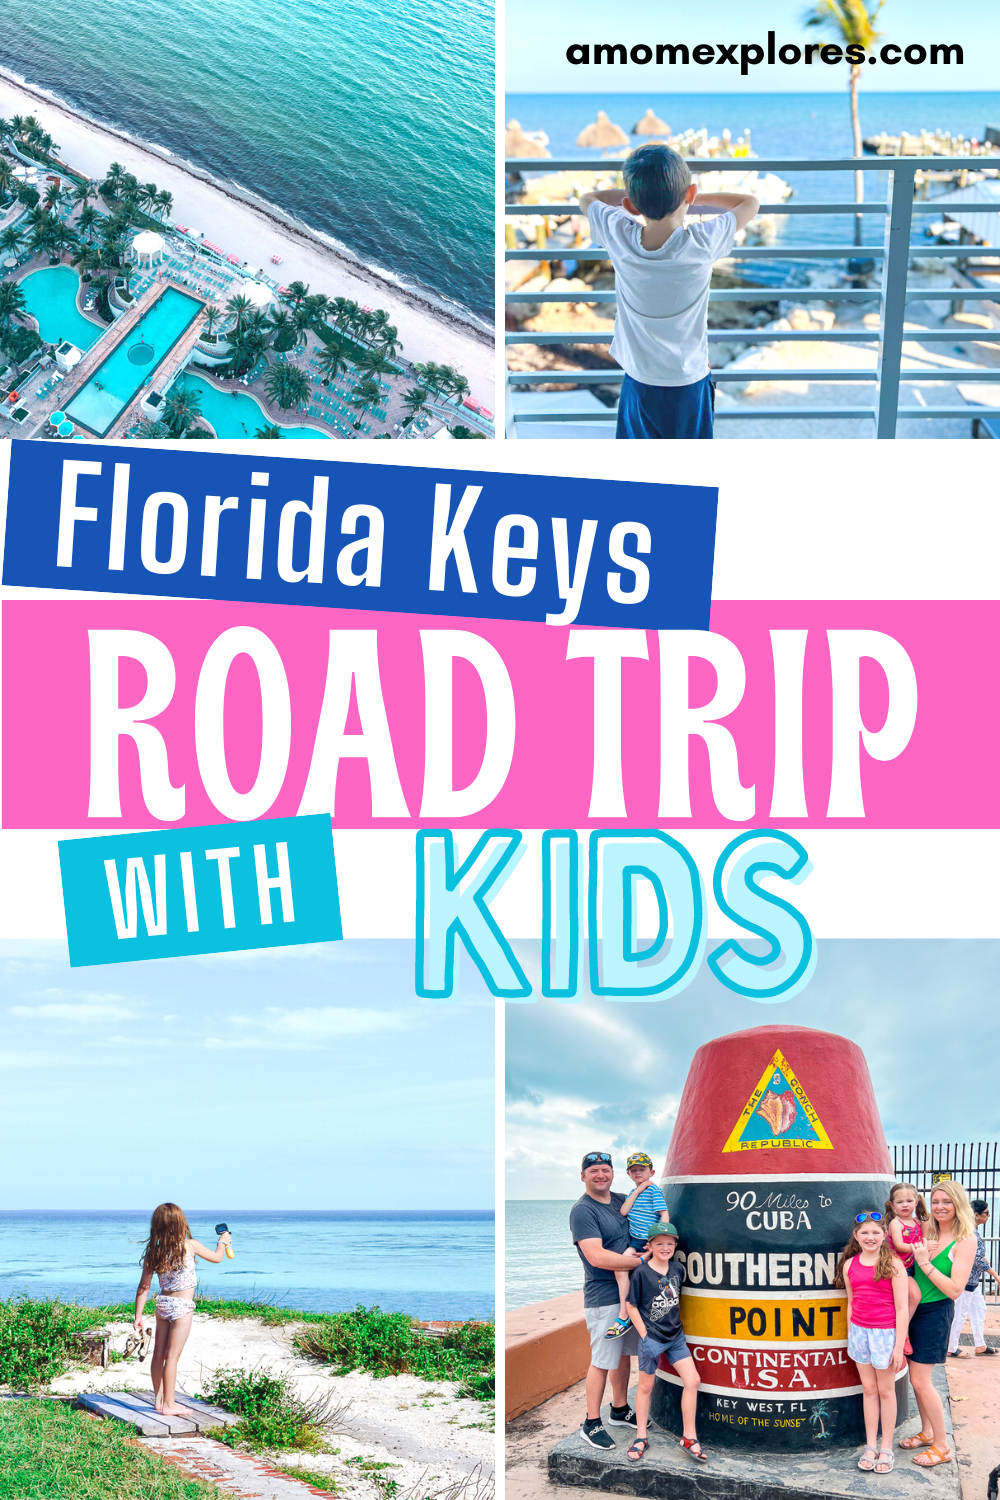 Florida keys road trip itinerary with kids.png